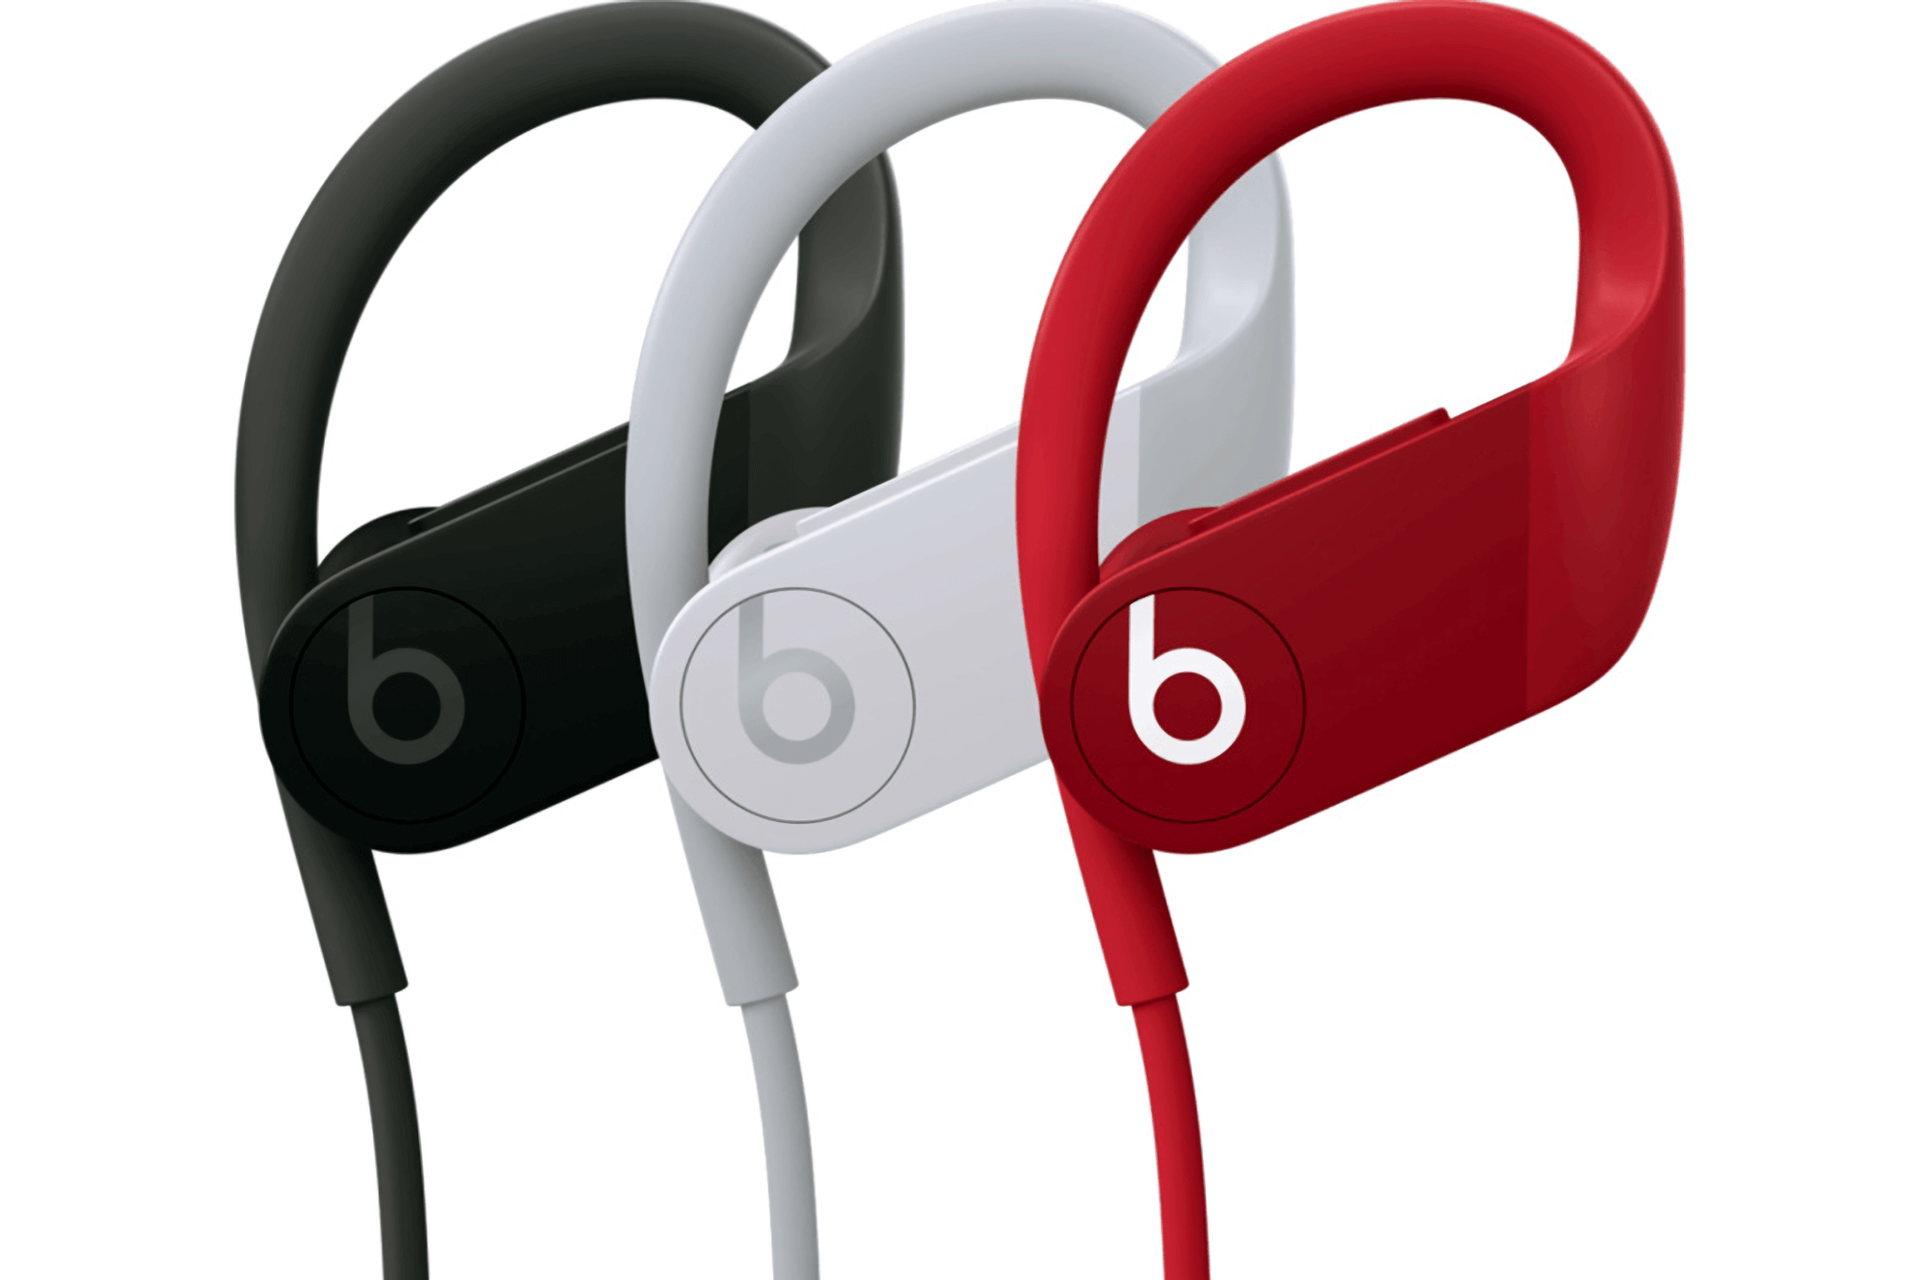 Upcoming Apple Powerbeats 4 earbuds leak, promise 15 hour battery life